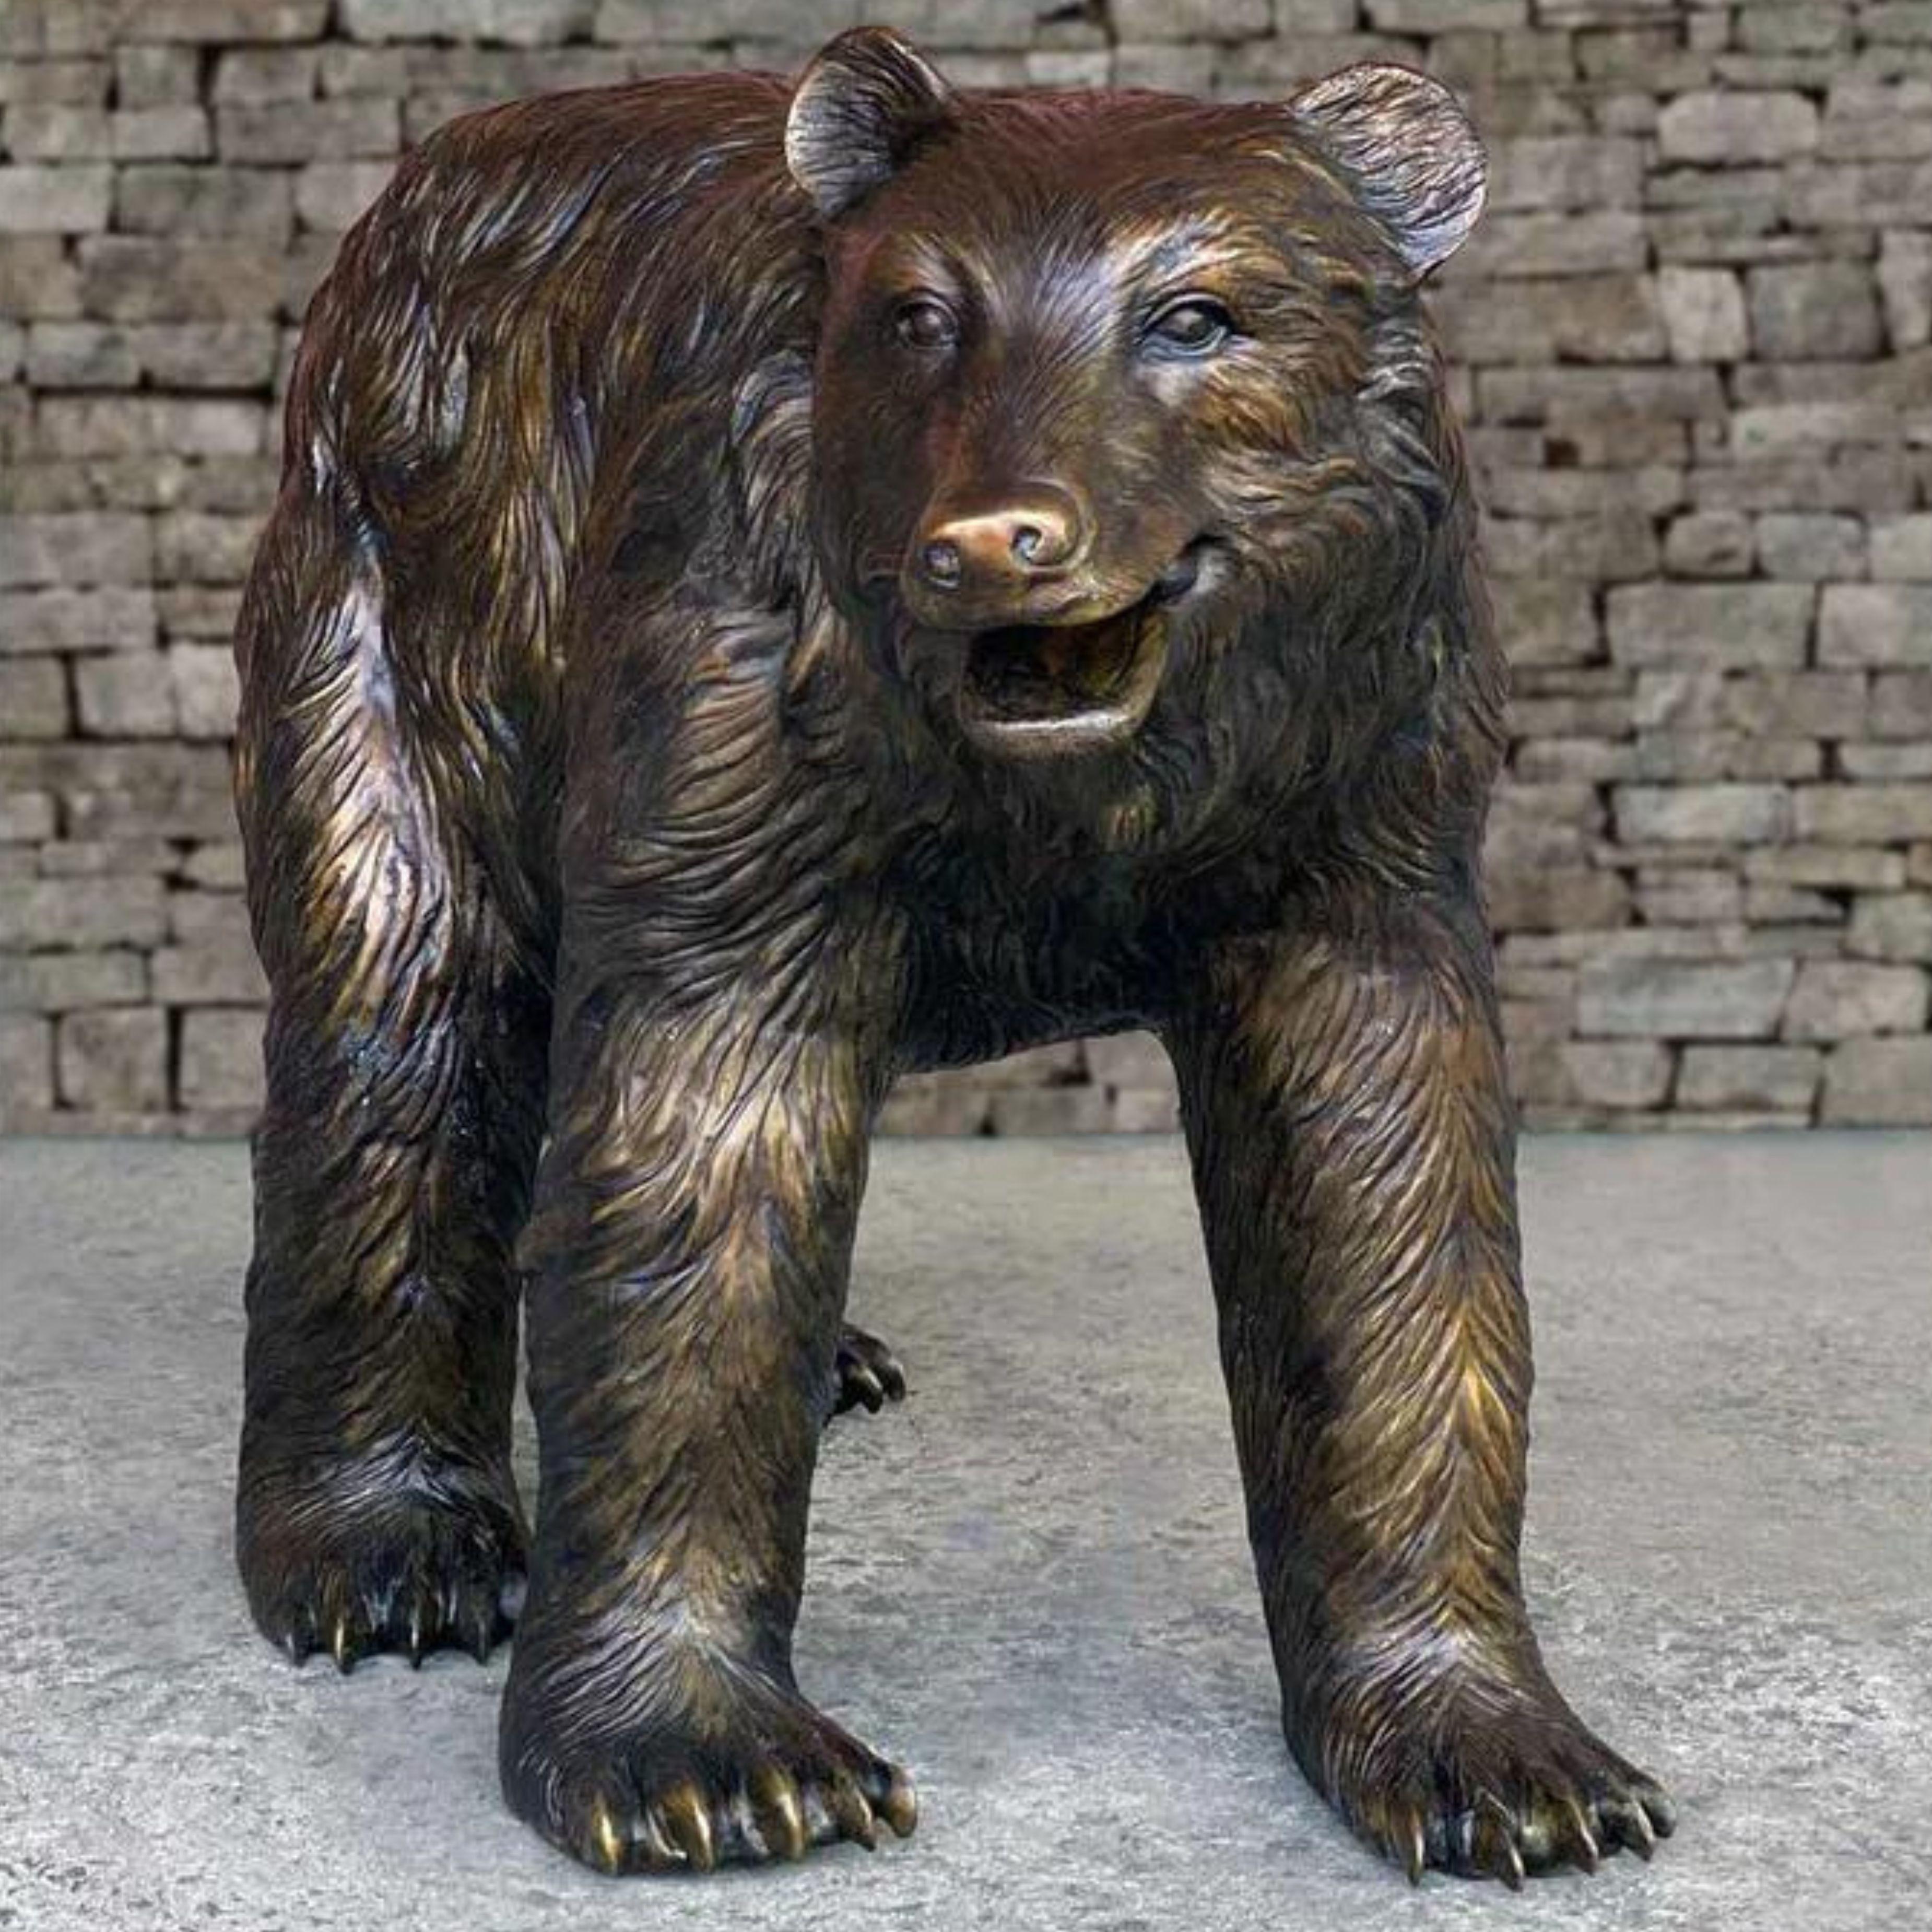 This gorgeous lost-wax bronze wildlife bear statue featured in our bears collection is a intricately designed lifelike representation. With the textured fur covering the full body, expressive face and realistic stance as the bear walks, this park